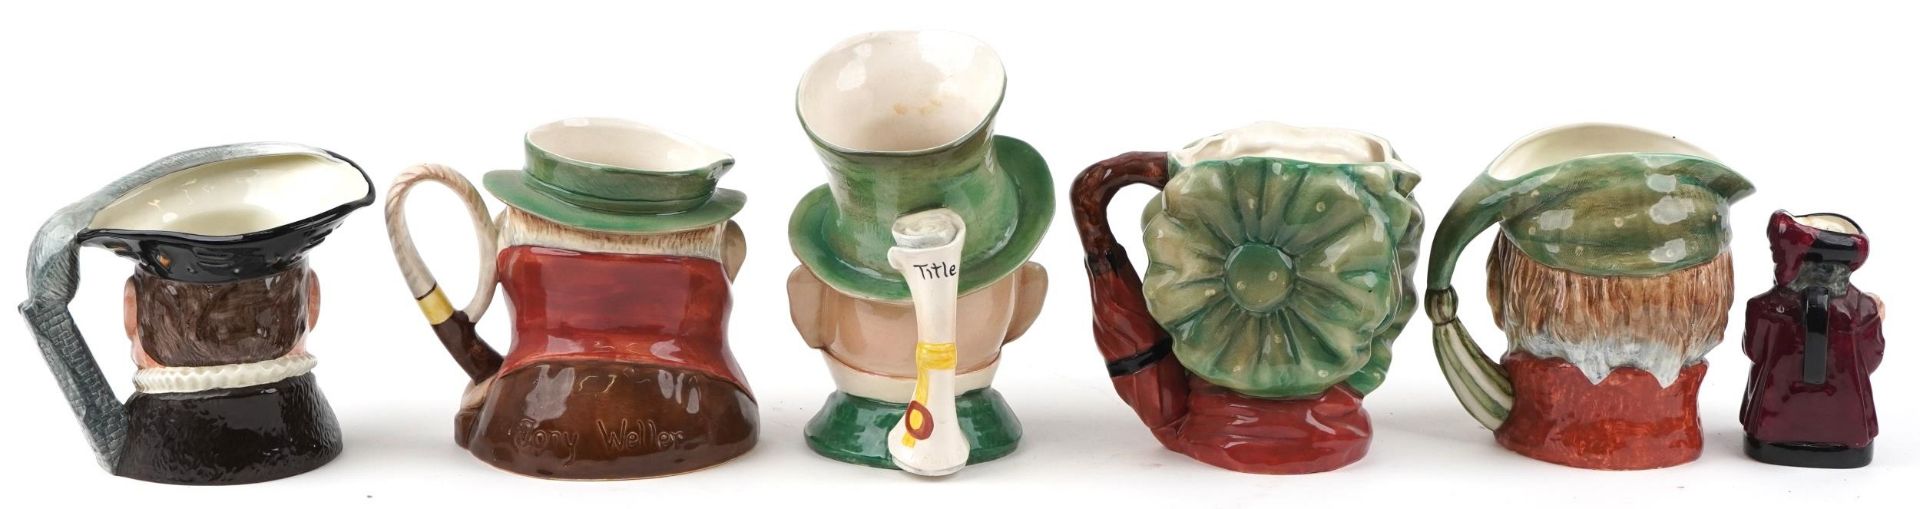 Six Beswick and Doulton character jugs including Scrooge and Henry VIII, the largest 23cm high - Image 3 of 5